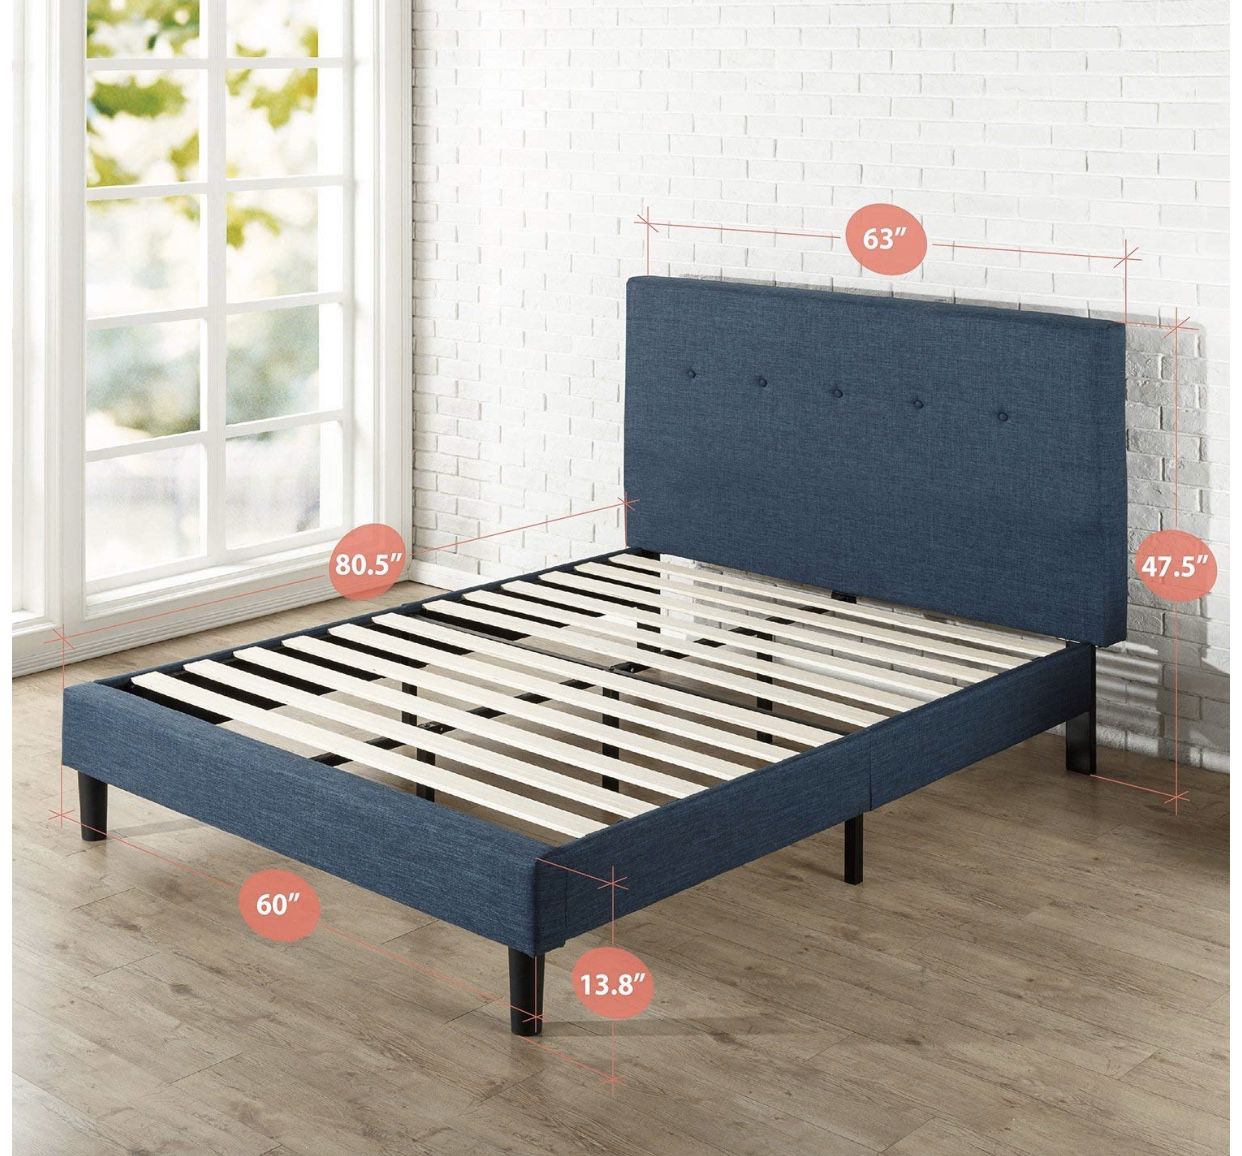 NEW! Queen Size Navy Blue Upholstered Platform Bed Frame NEW IN BOX 😊 $120